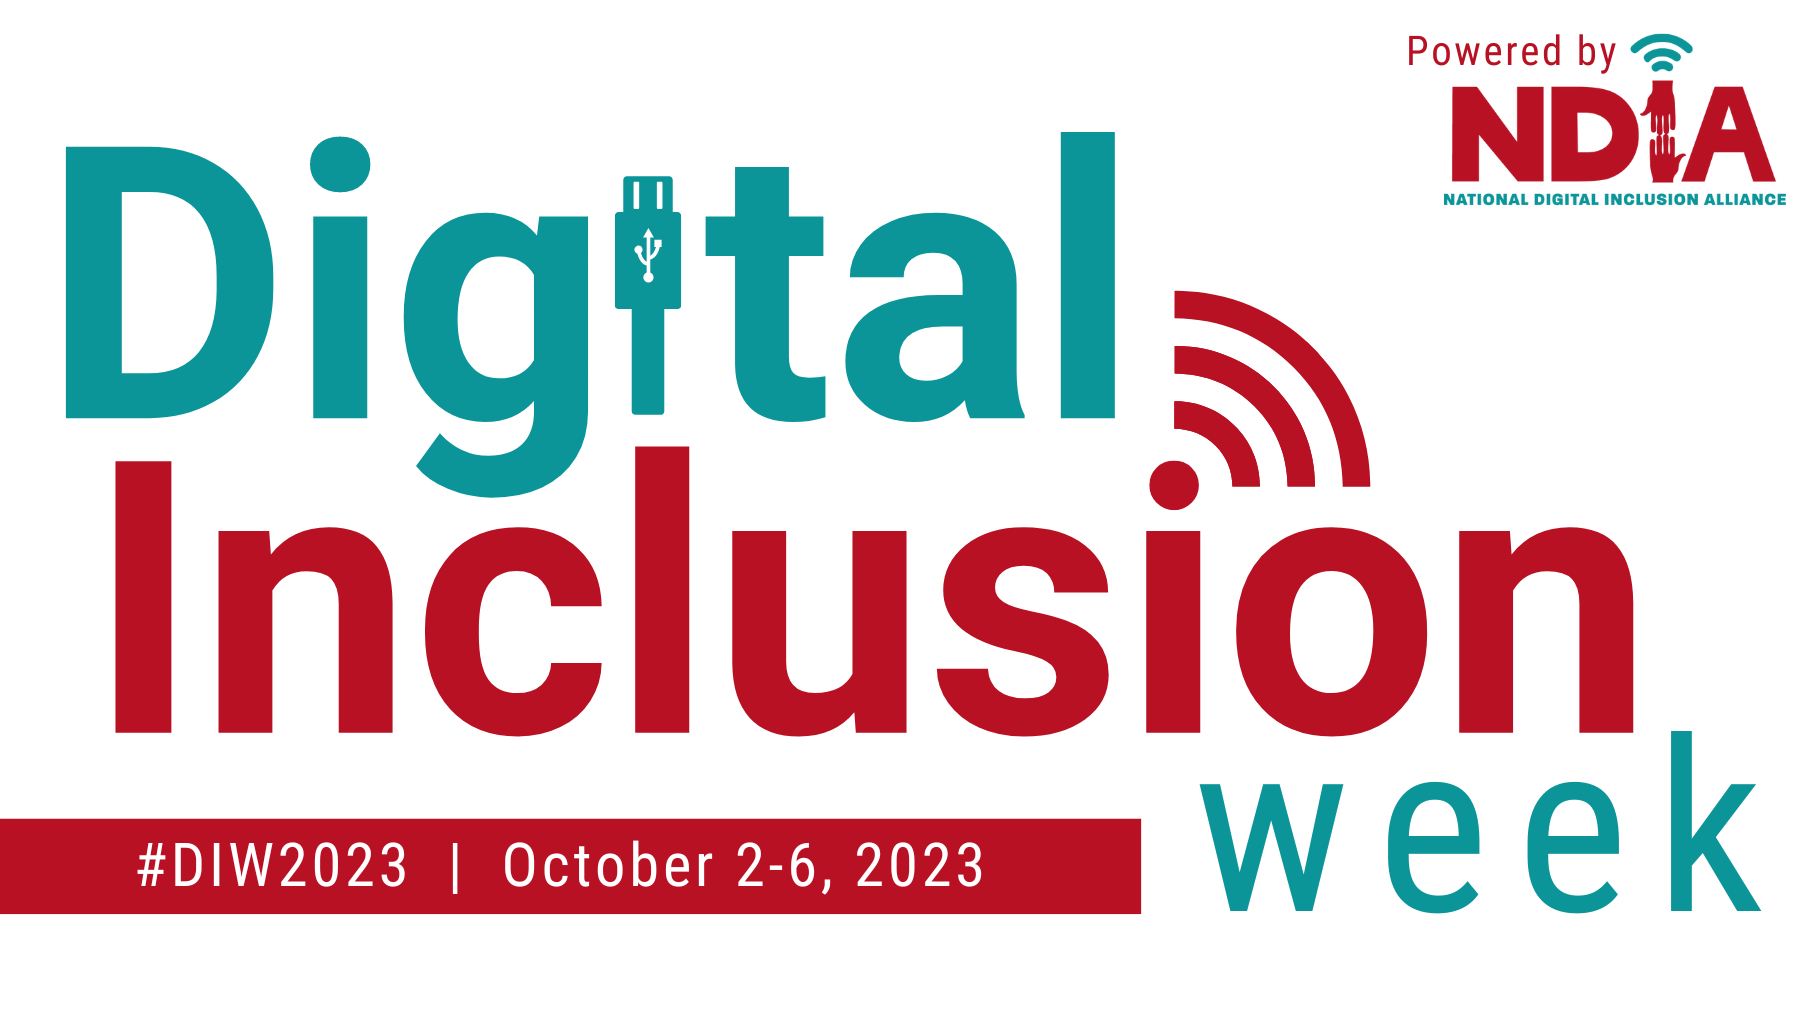 Graphic: Digital Inclusion Week, Powered by NDIA, #DIW2023, October 2-6,2023